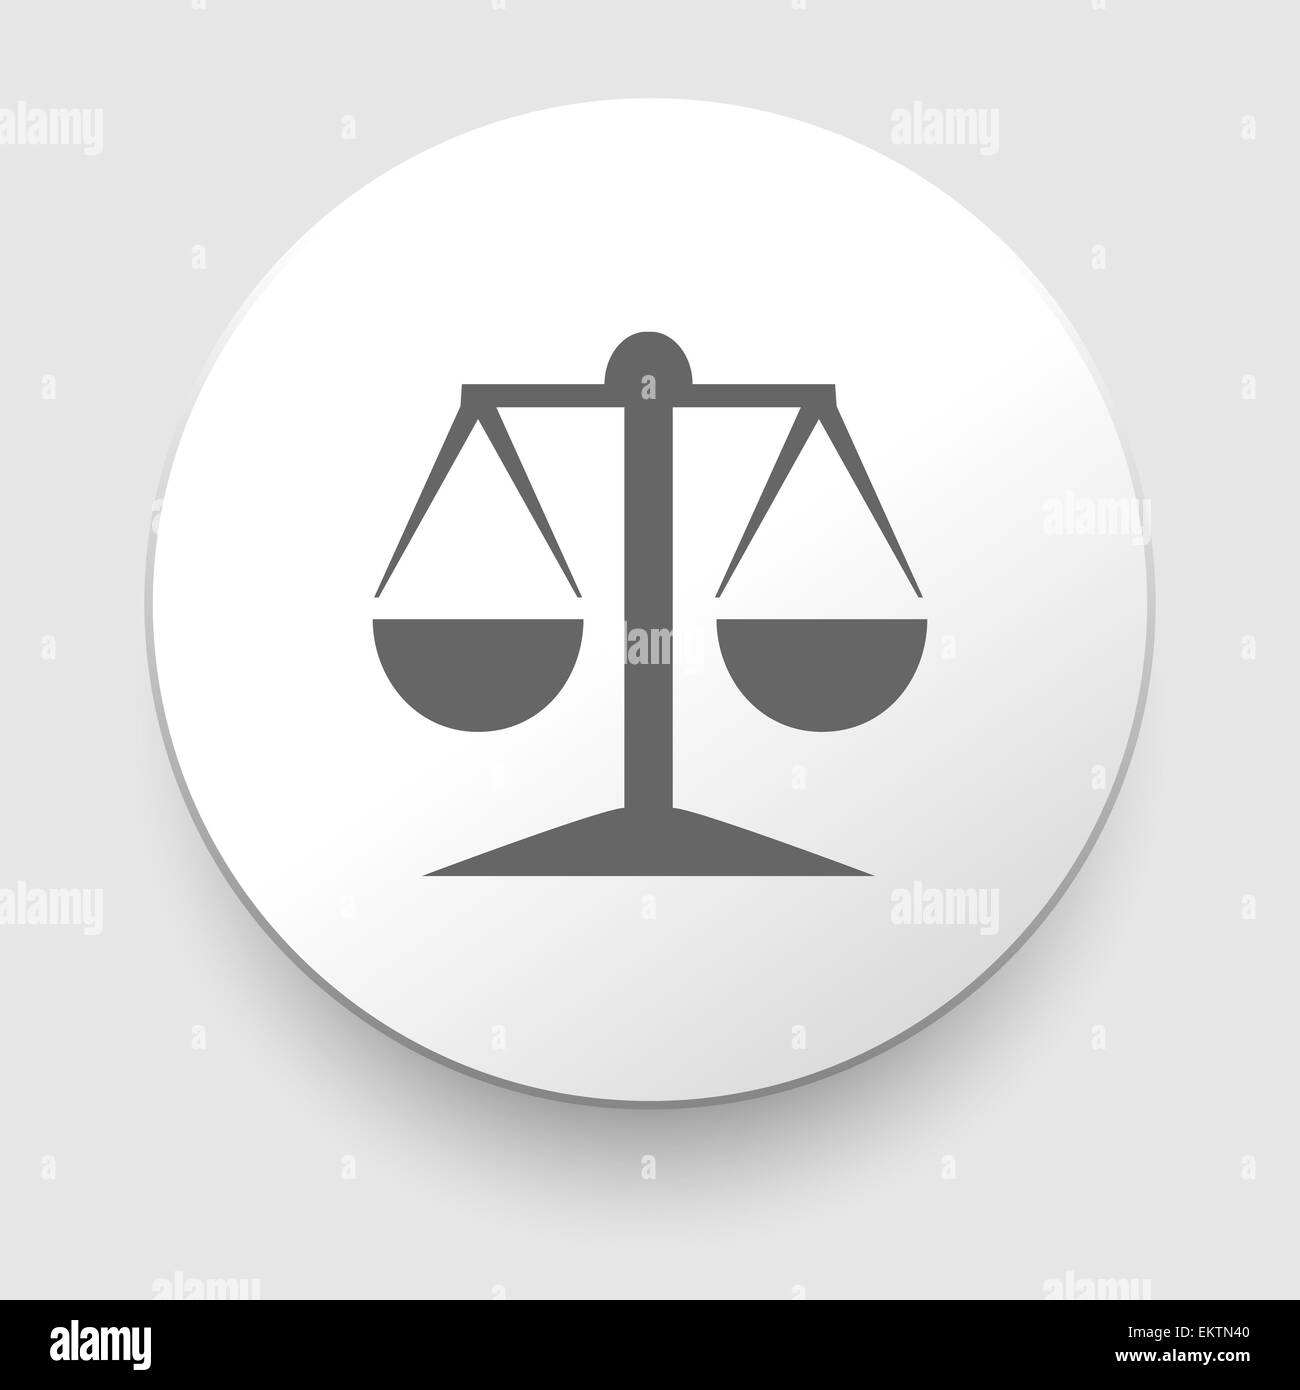 Vector icon of justice scales Stock Photo